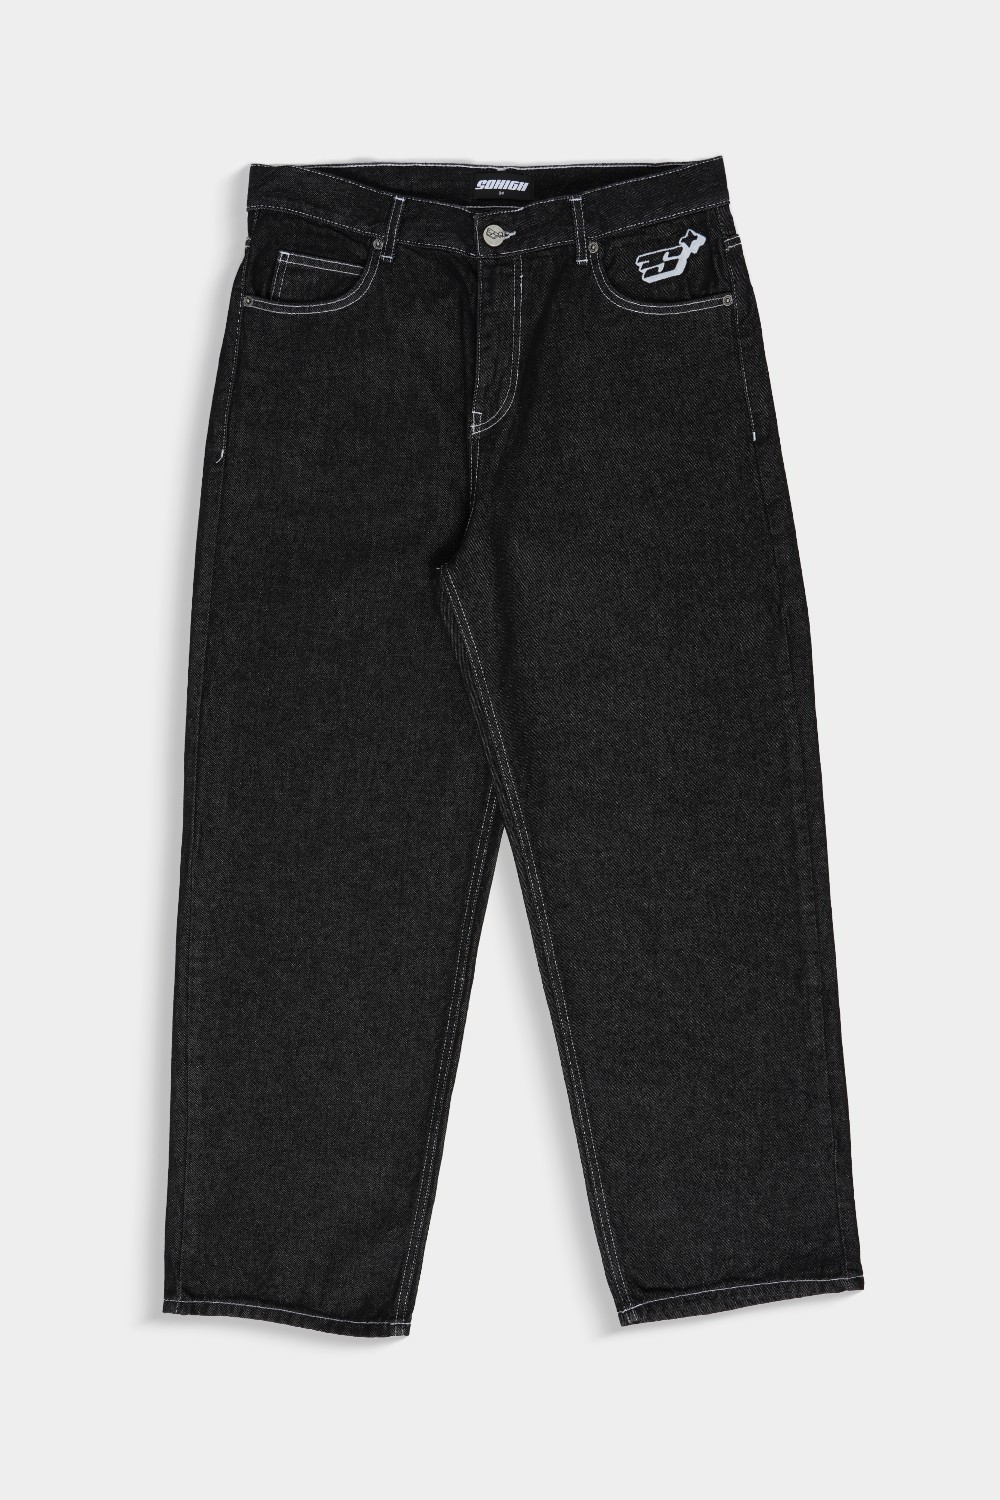 Baggy Skate Jeans - Contrast Stitch (SHBS-6)